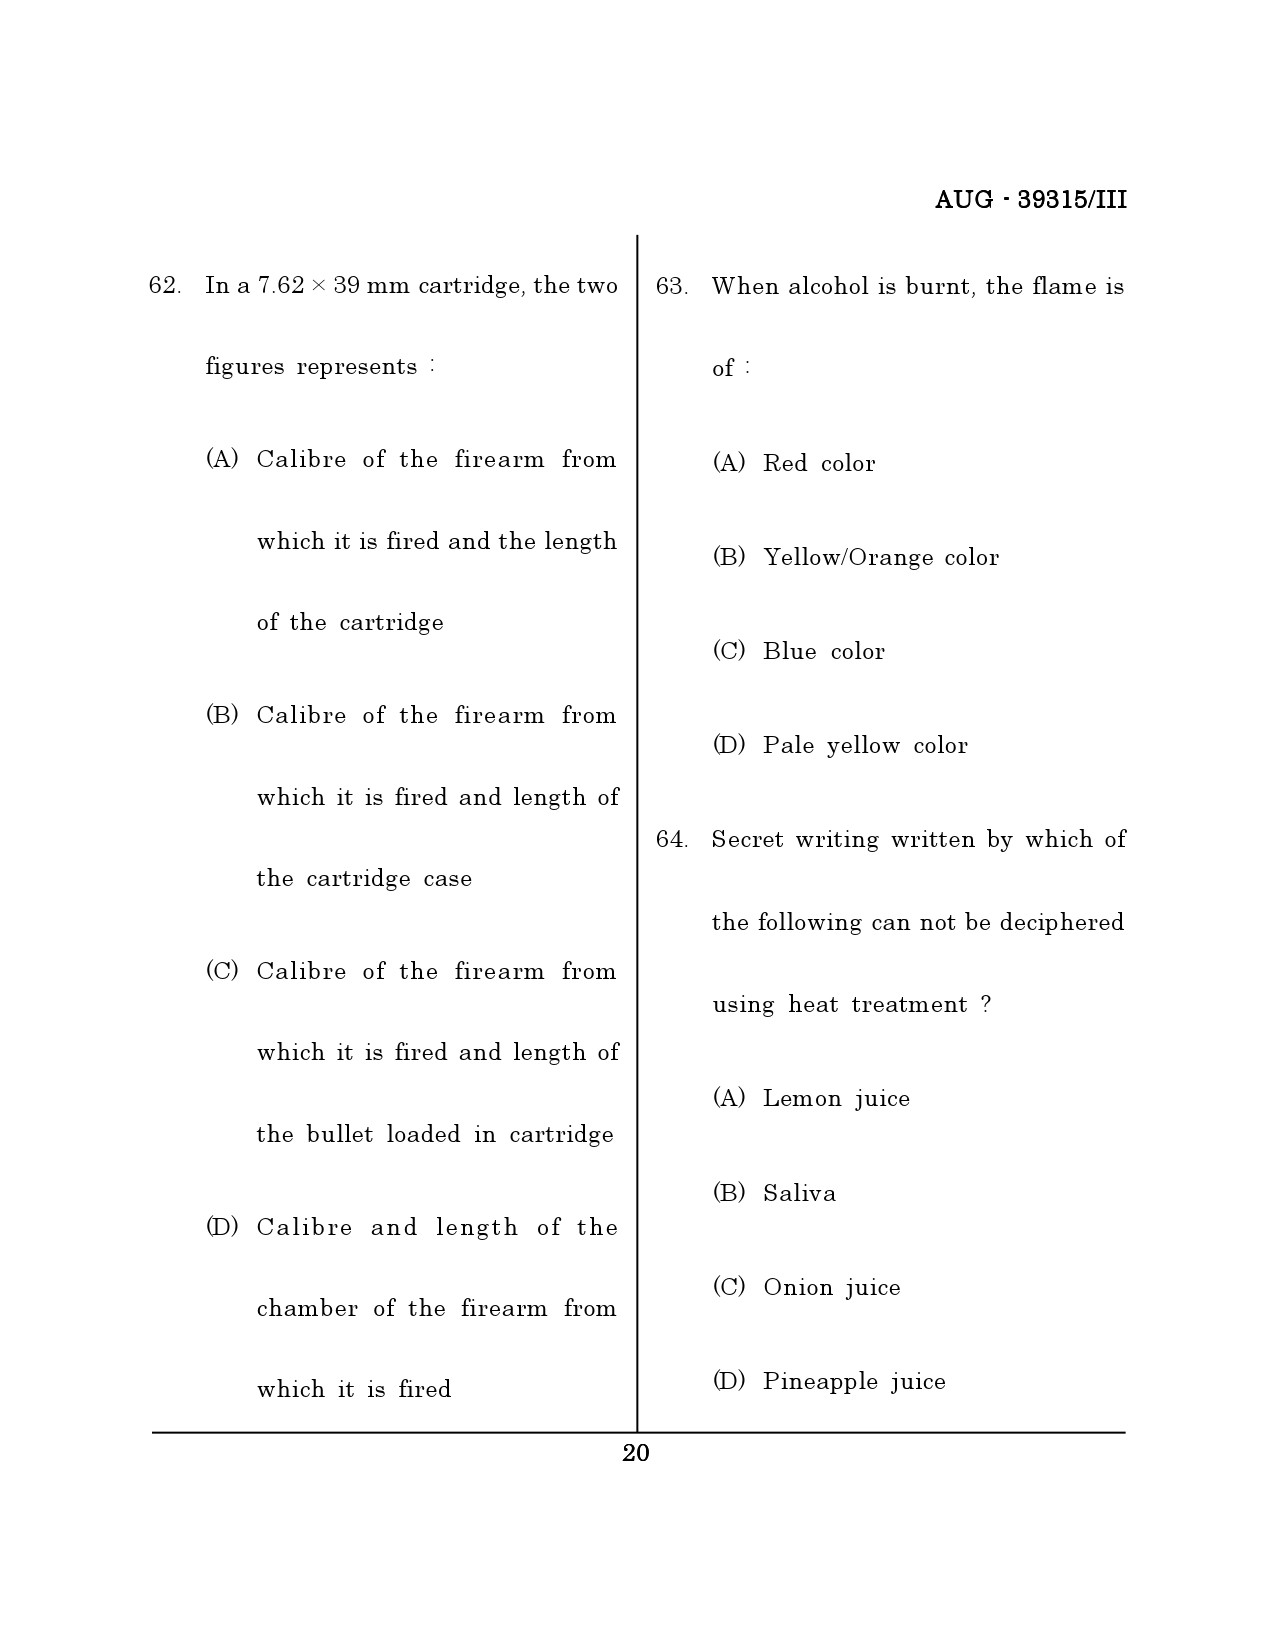 Maharashtra SET Forensic Science Question Paper III August 2015 19